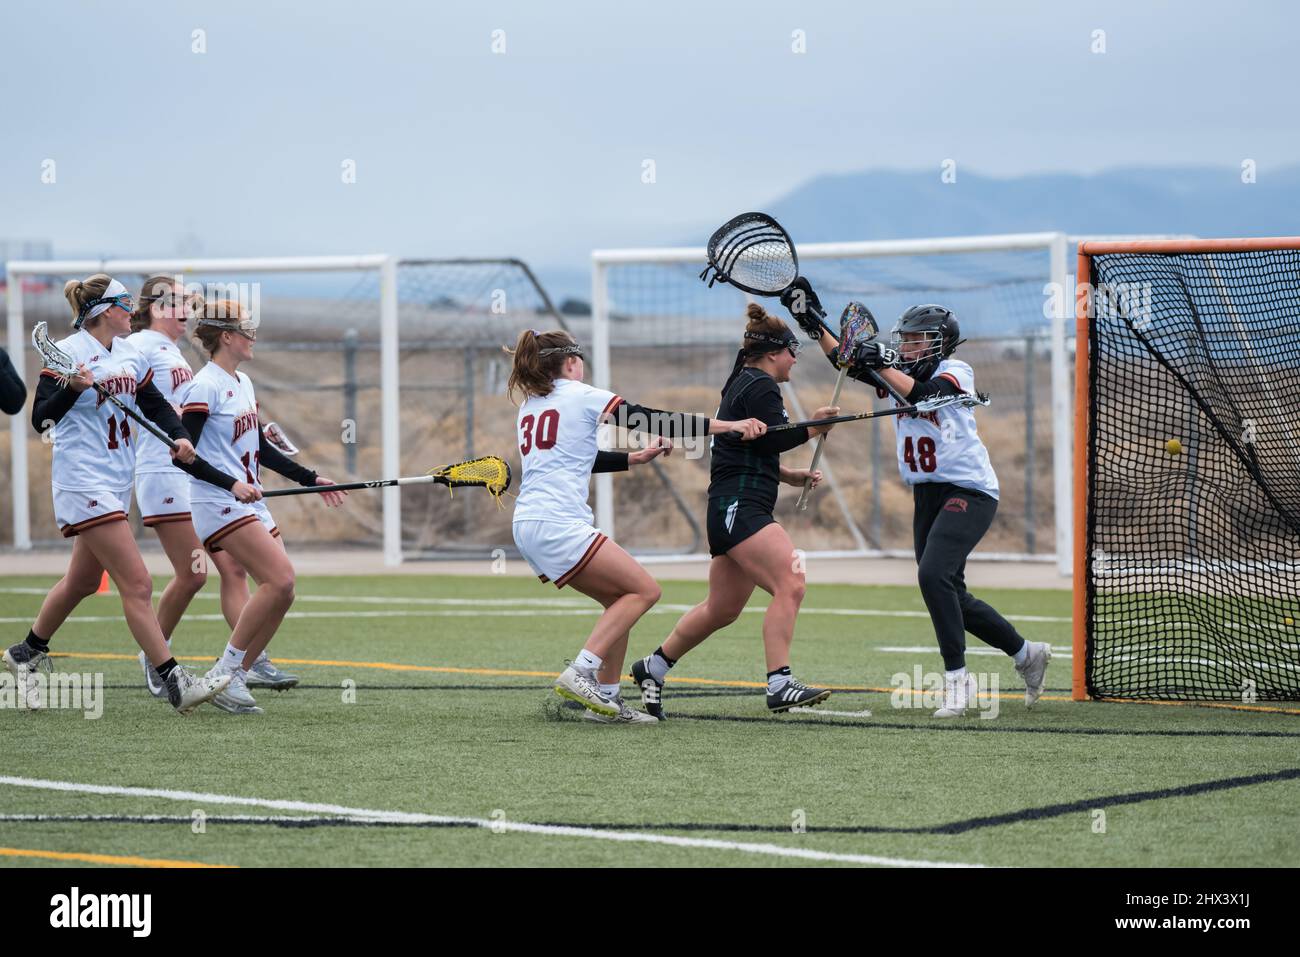 Vineyard, Utah, USA - March 5, 2022.  The intensity and athleticism of women's LaCrosse.  Speed, coordination, and toughness is required in this sport. Stock Photo